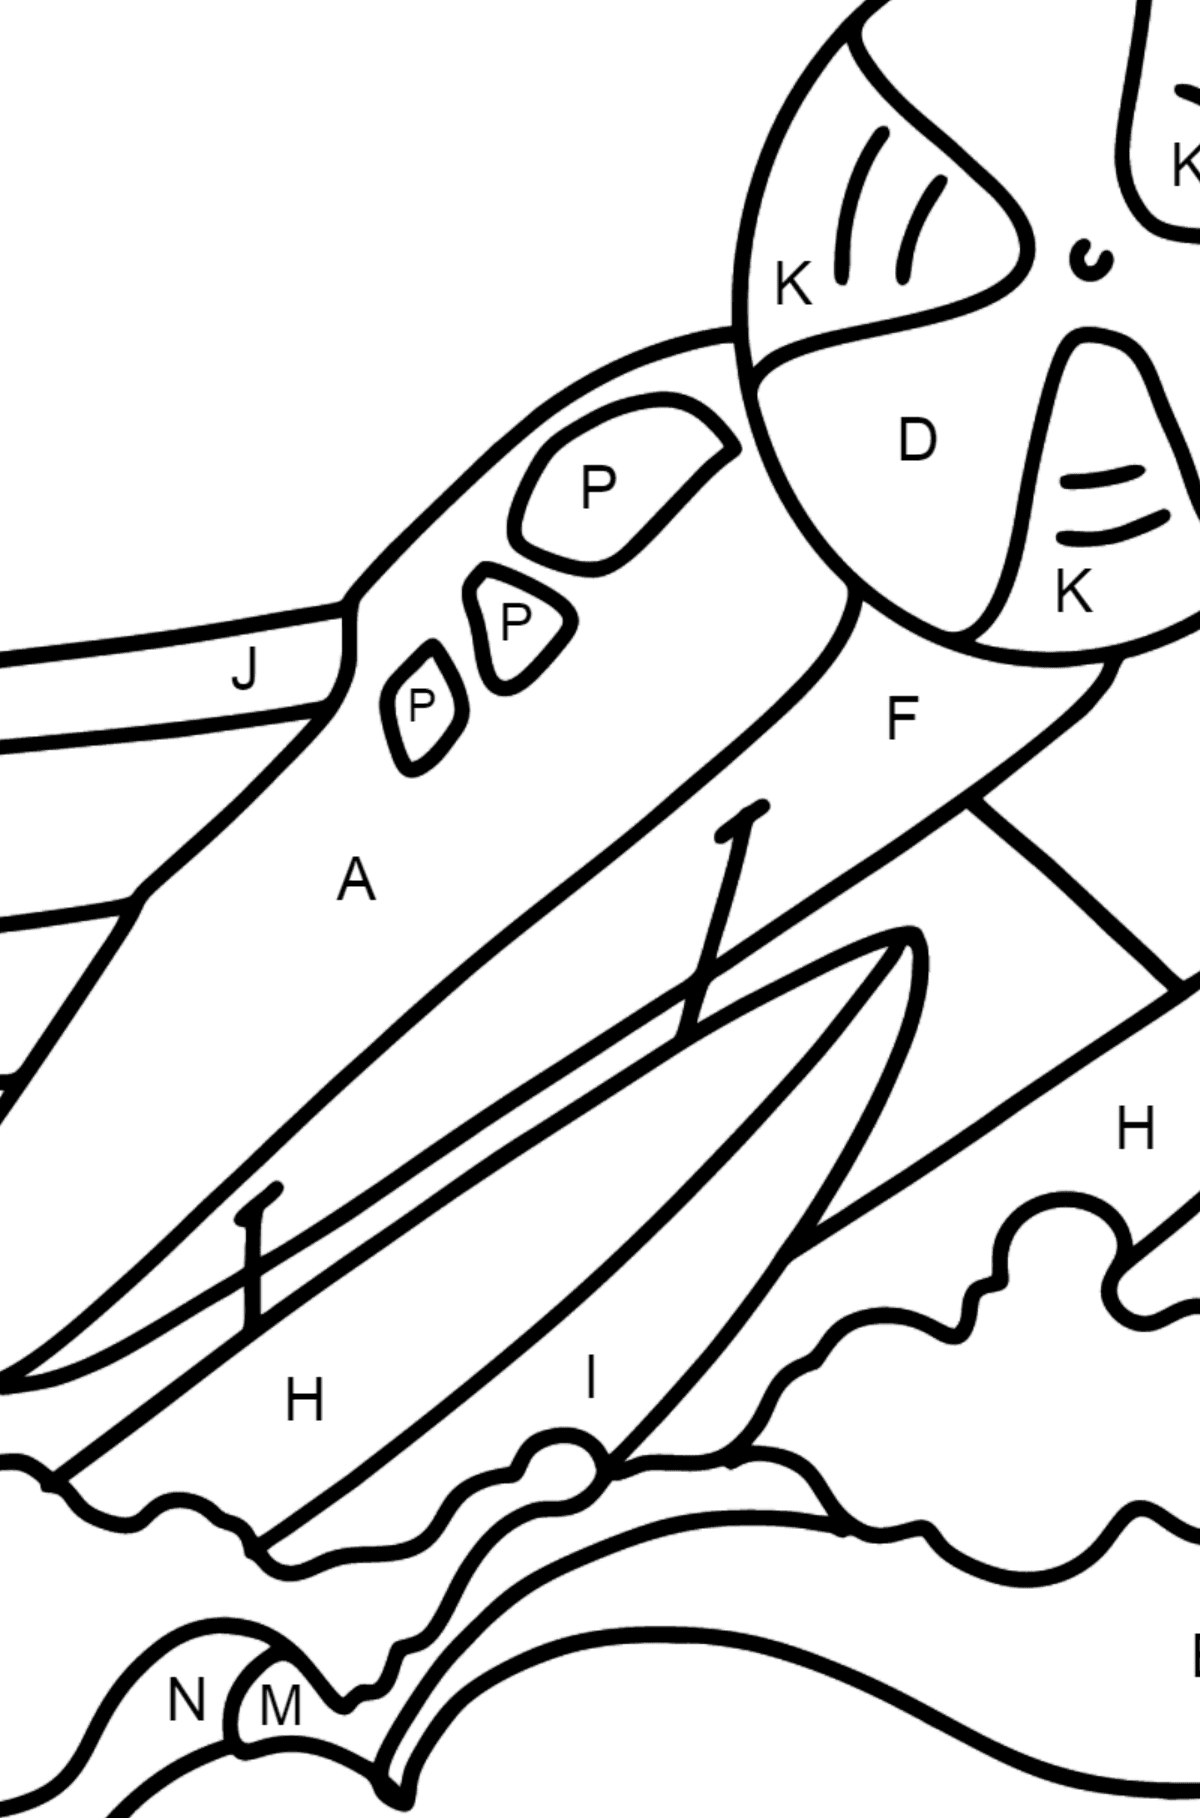 Amphibious Airplane coloring page - Coloring by Letters for Kids